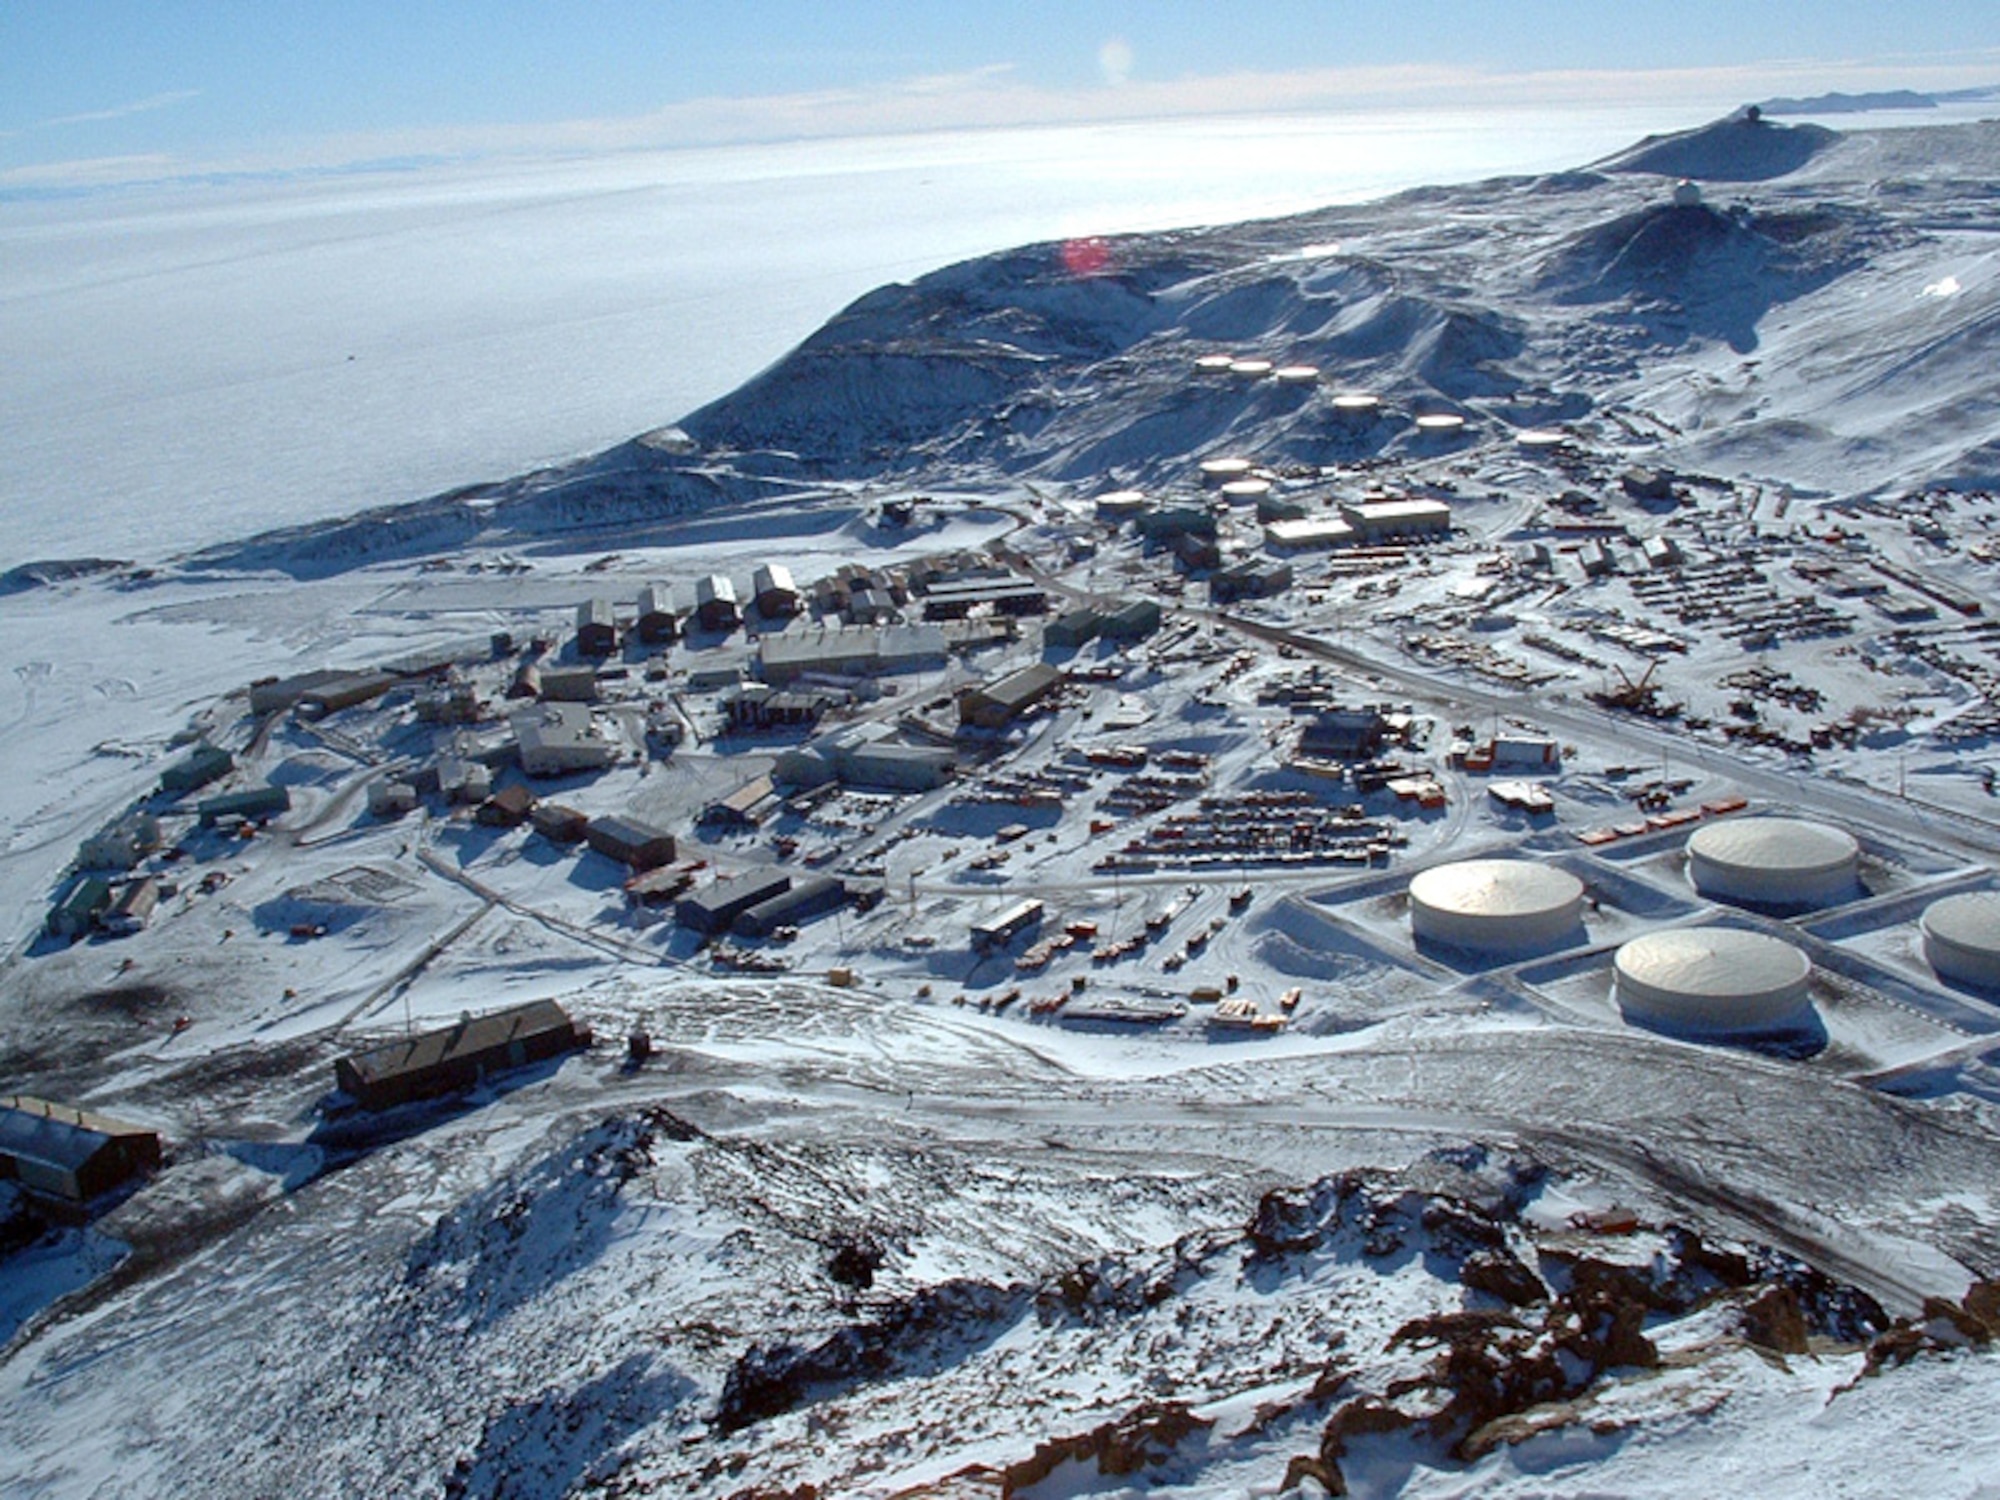 The National Science Foundation’s McMurdo Station, as seen from the summit of Observation Hill, Antarctica. The station was established in December 1955 and is the logistics hub of the U.S. Antarctic Program, with a harbor, landing strips on sea ice and shelf ice, and a helicopter pad. (Courtesy Photo)